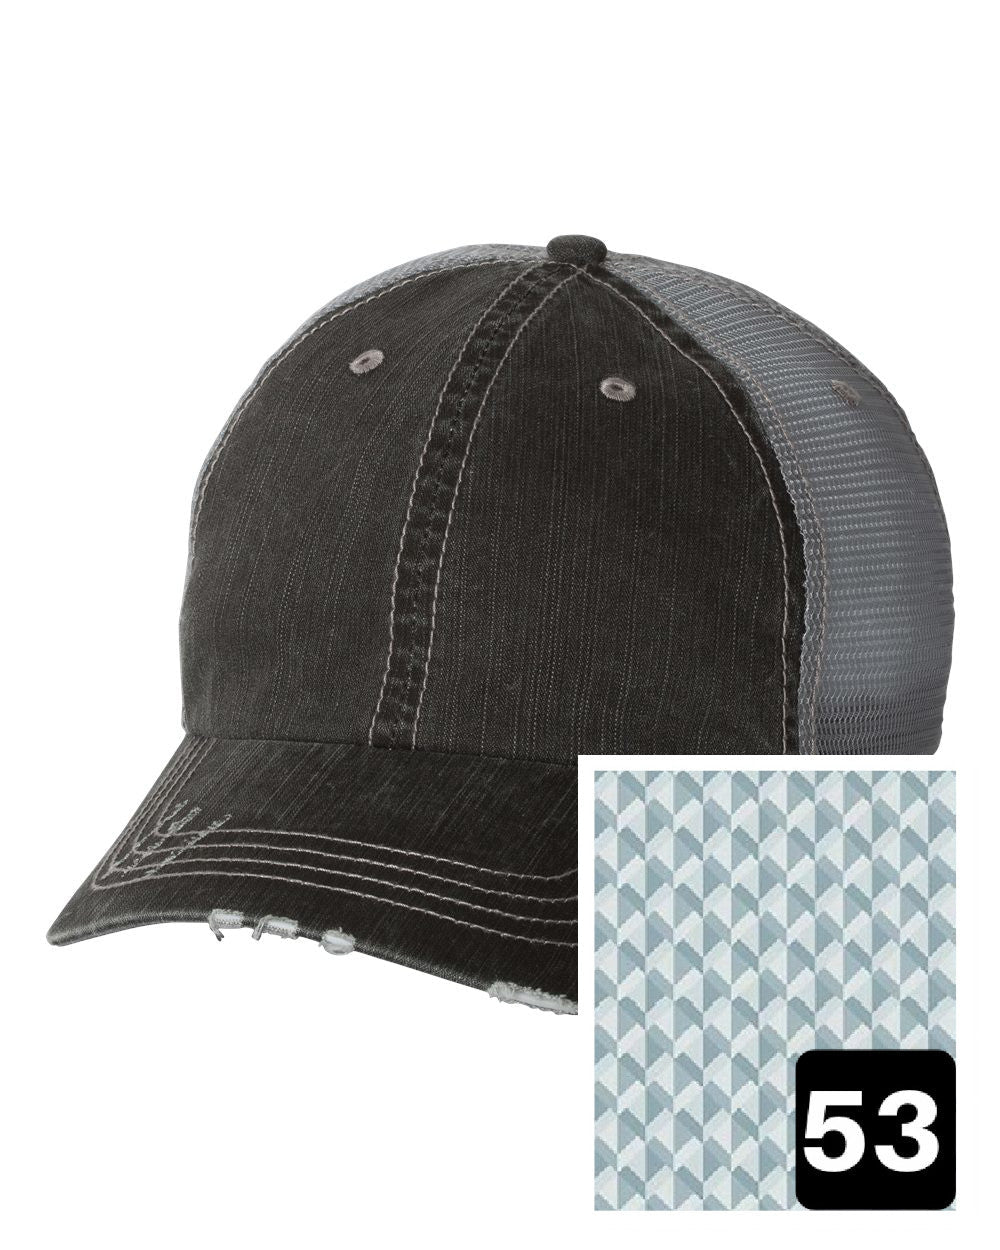 gray distressed trucker hat with multi-color stripe fabric state of South Carolina